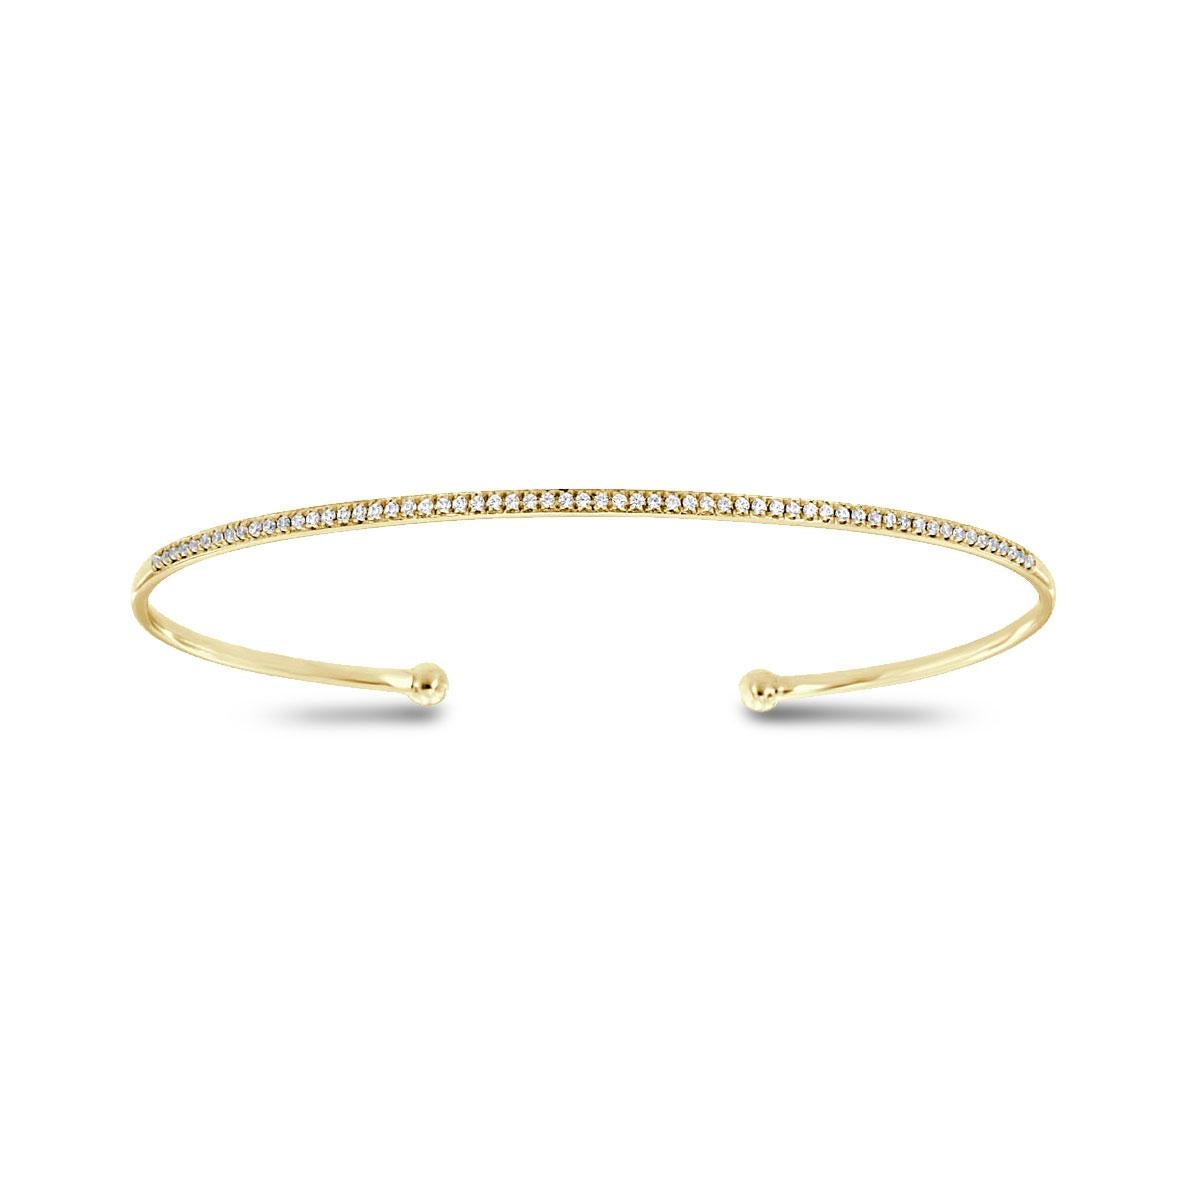 This petite flex bangle features one row of round brilliant diamonds micro-prong-set. It is stackable and fun to wear daily. Experience the difference!

Product details: 

Center Gemstone Type: NATURAL DIAMOND
Center Gemstone Color: WHITE
Center